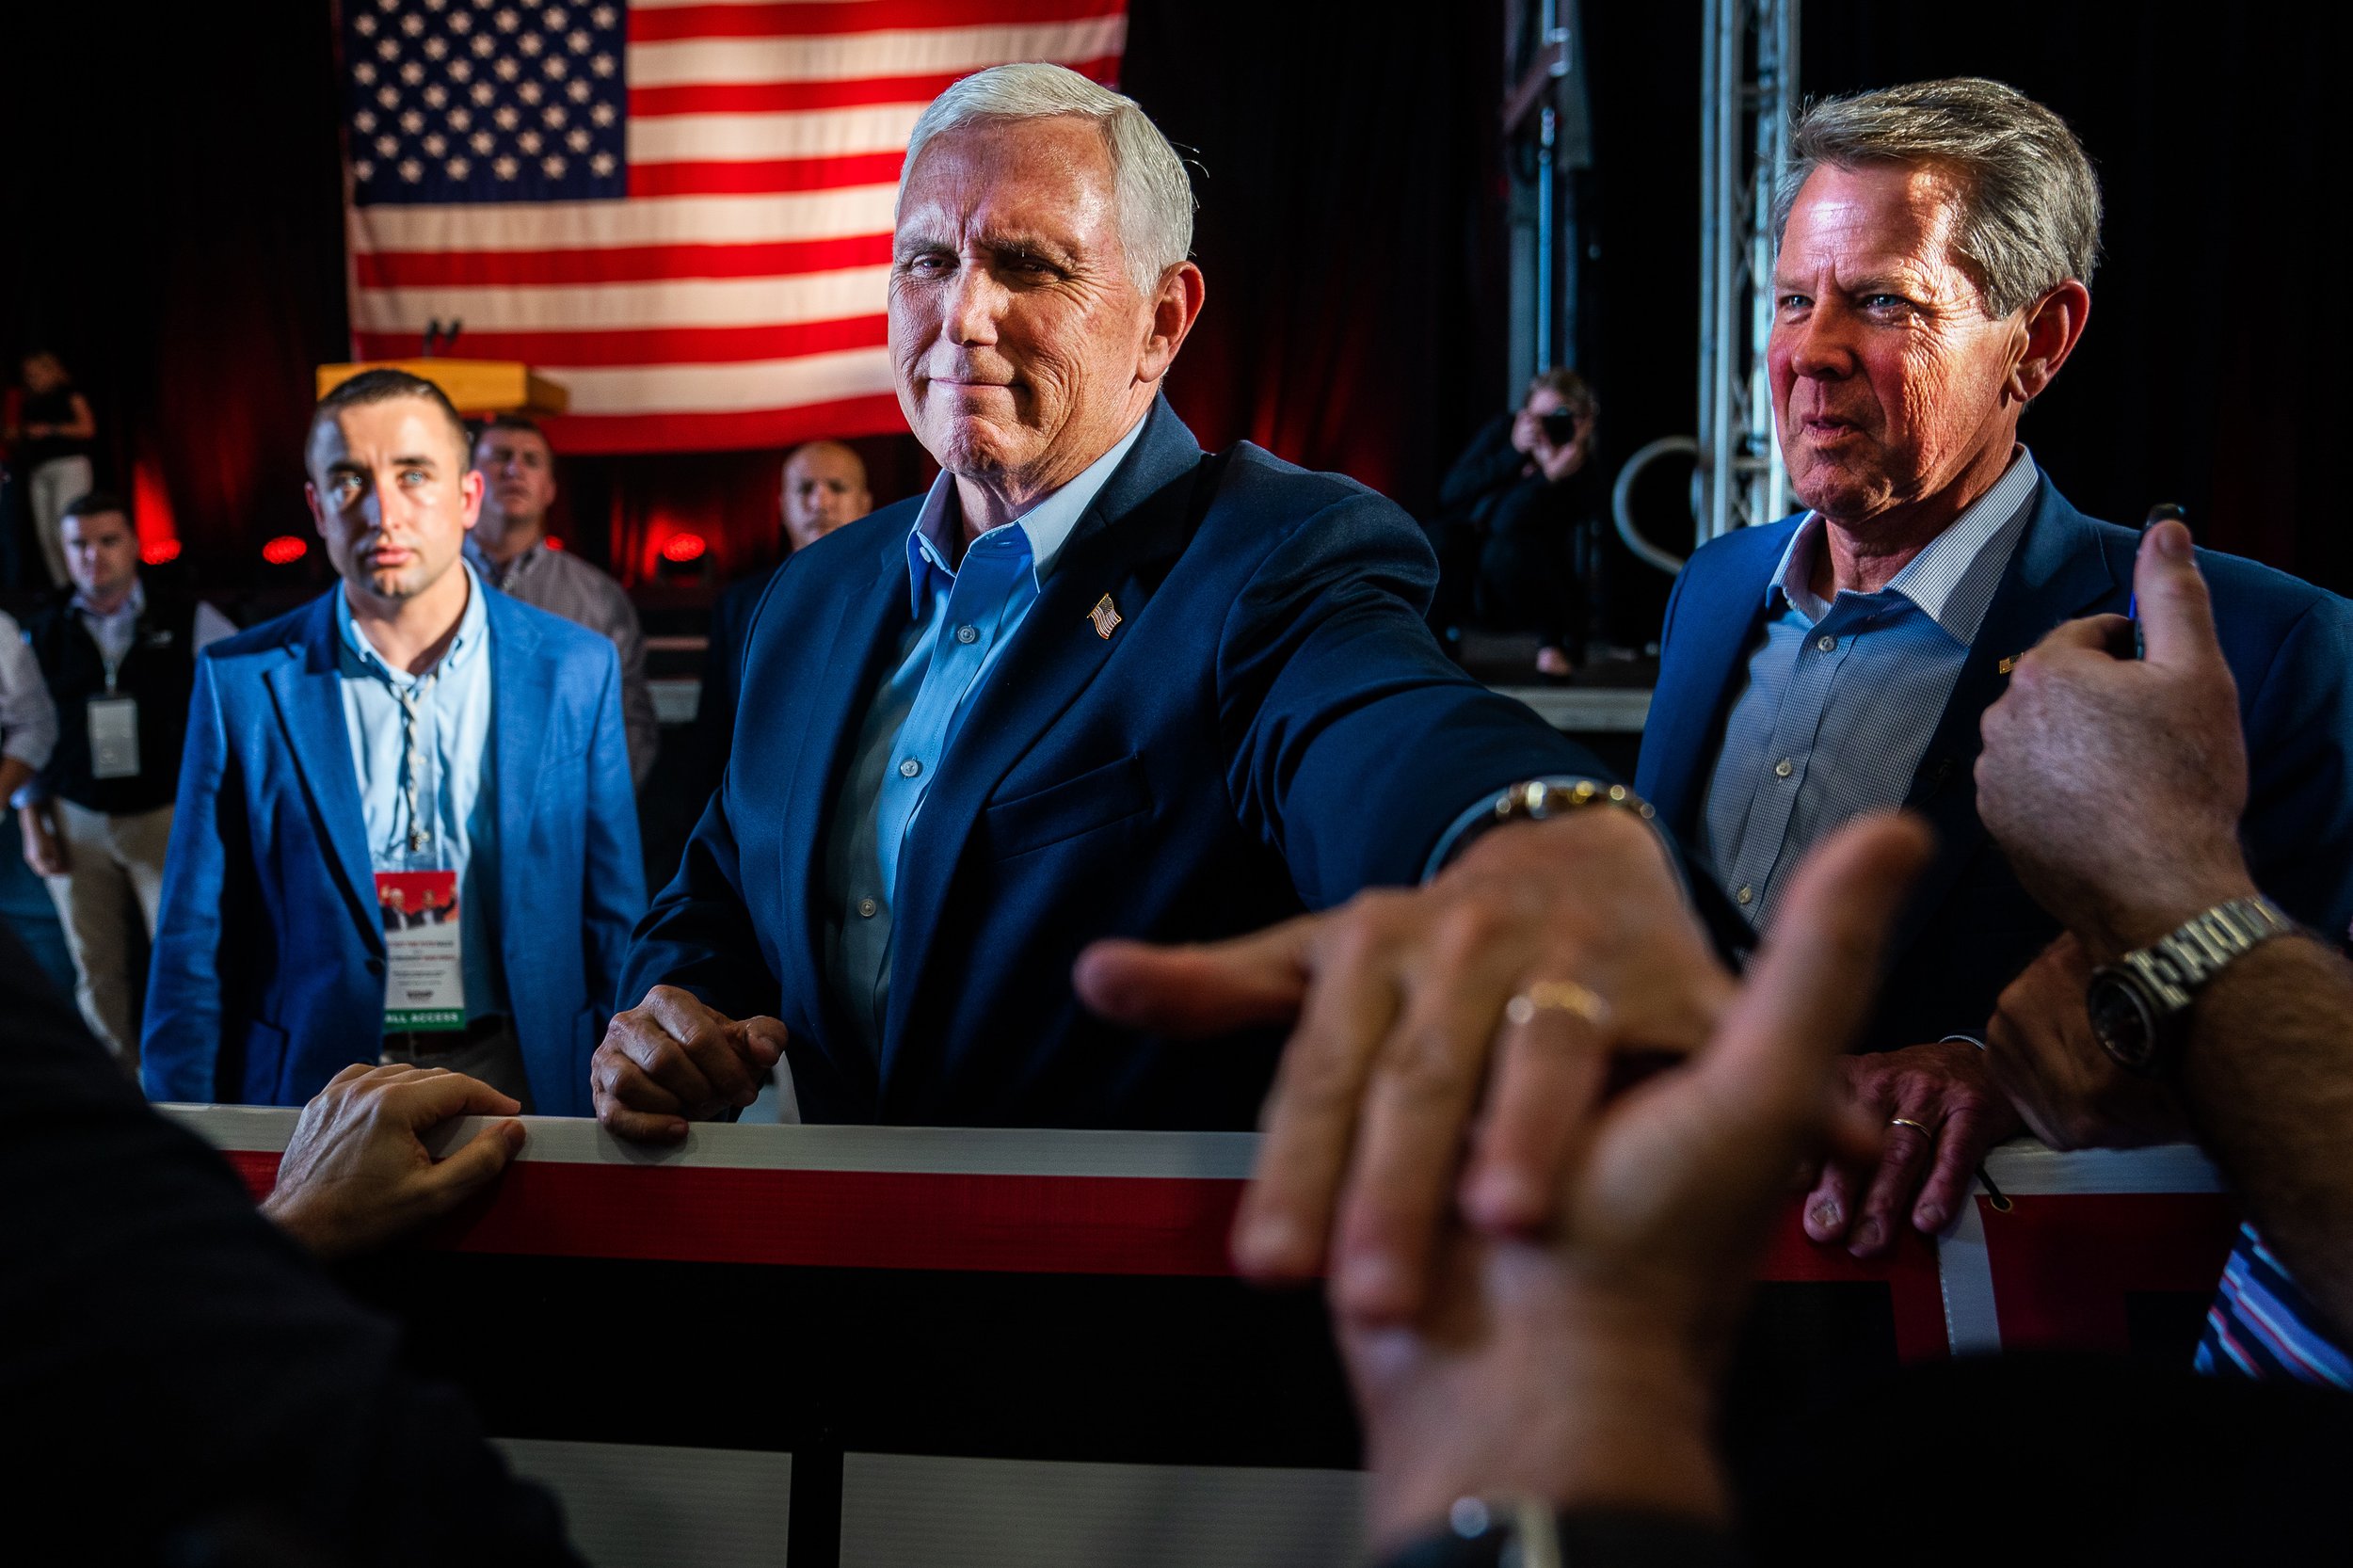  Former Vice President Mike Pence and Georgia Governor Brian Kemp greet supporters during a rally at the Cobb County International Airport.  